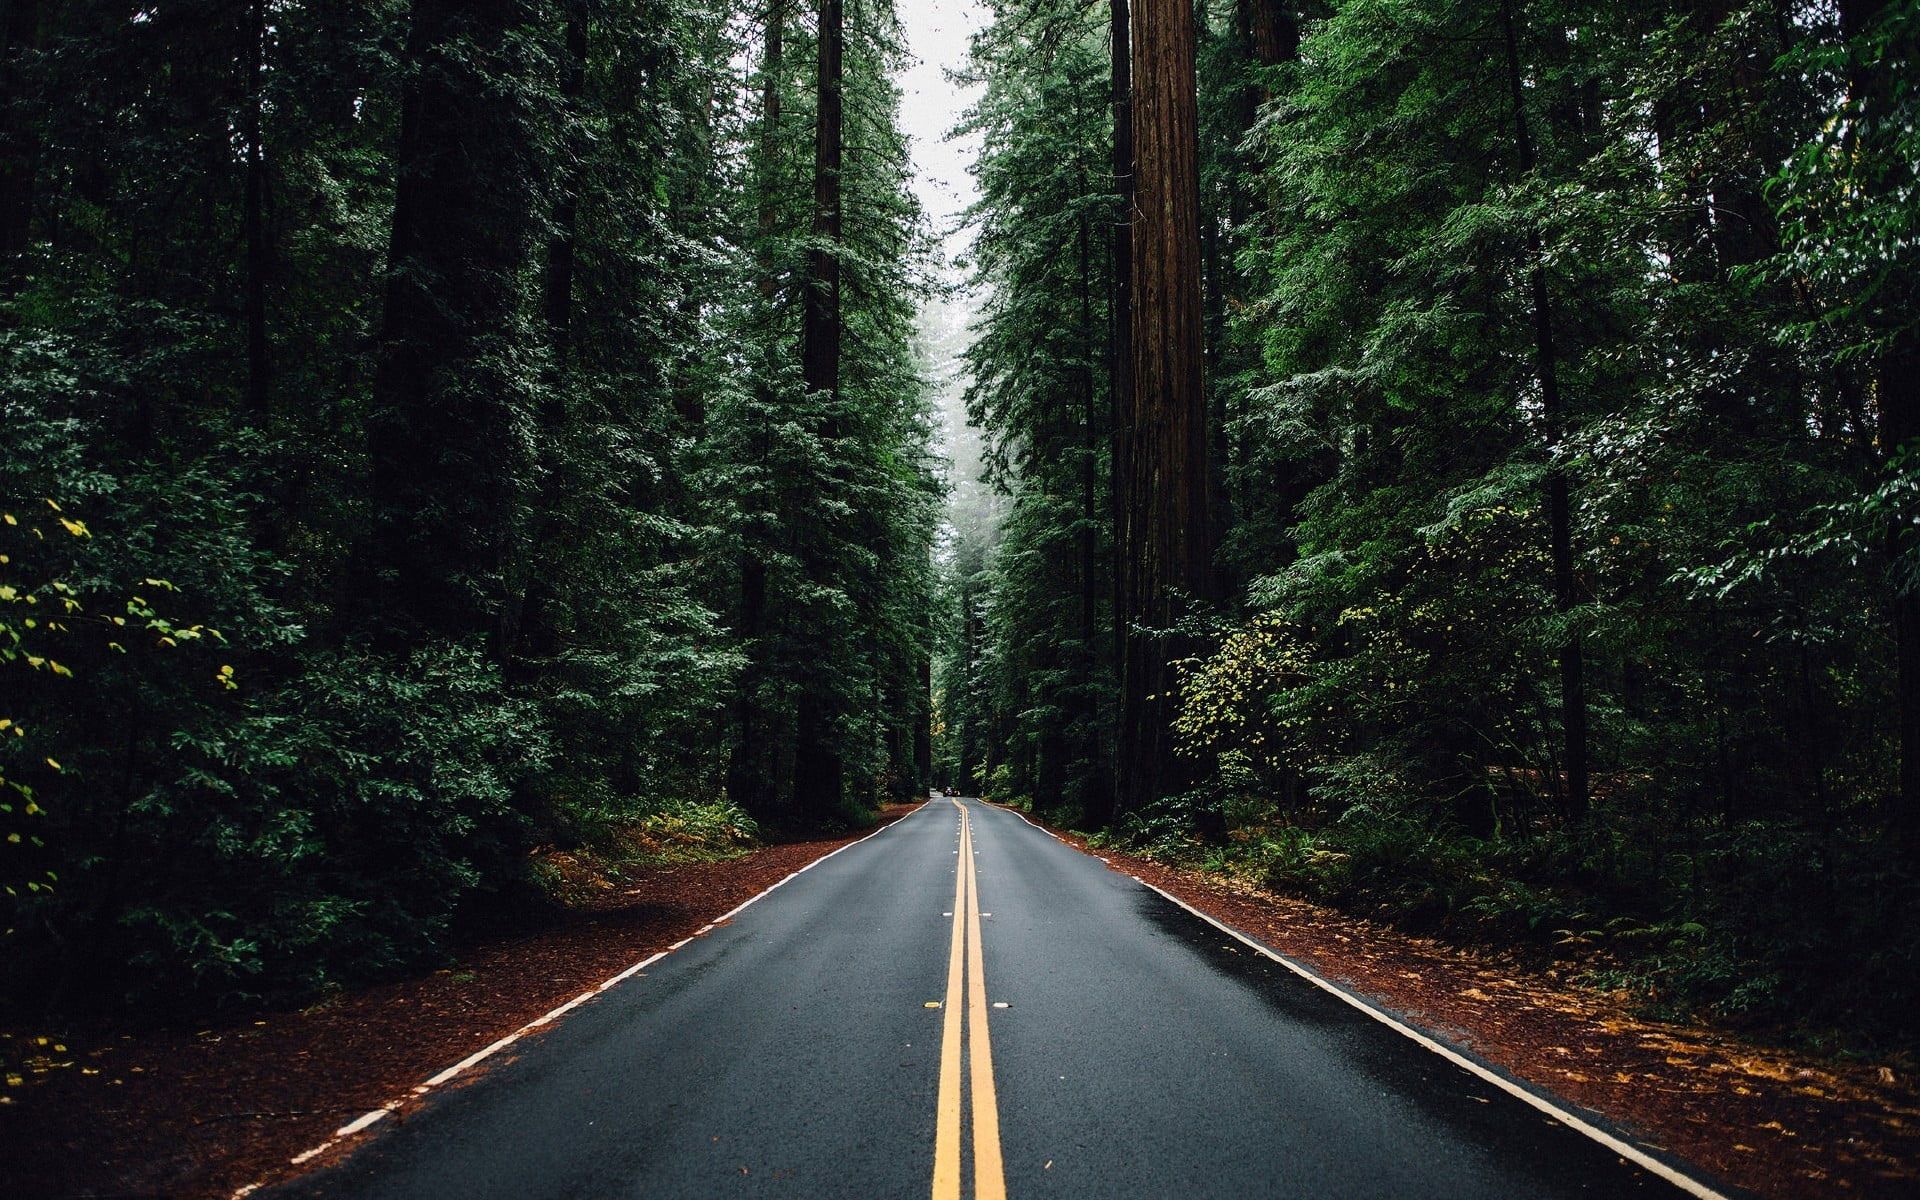 A road that is surrounded by trees - Forest, road